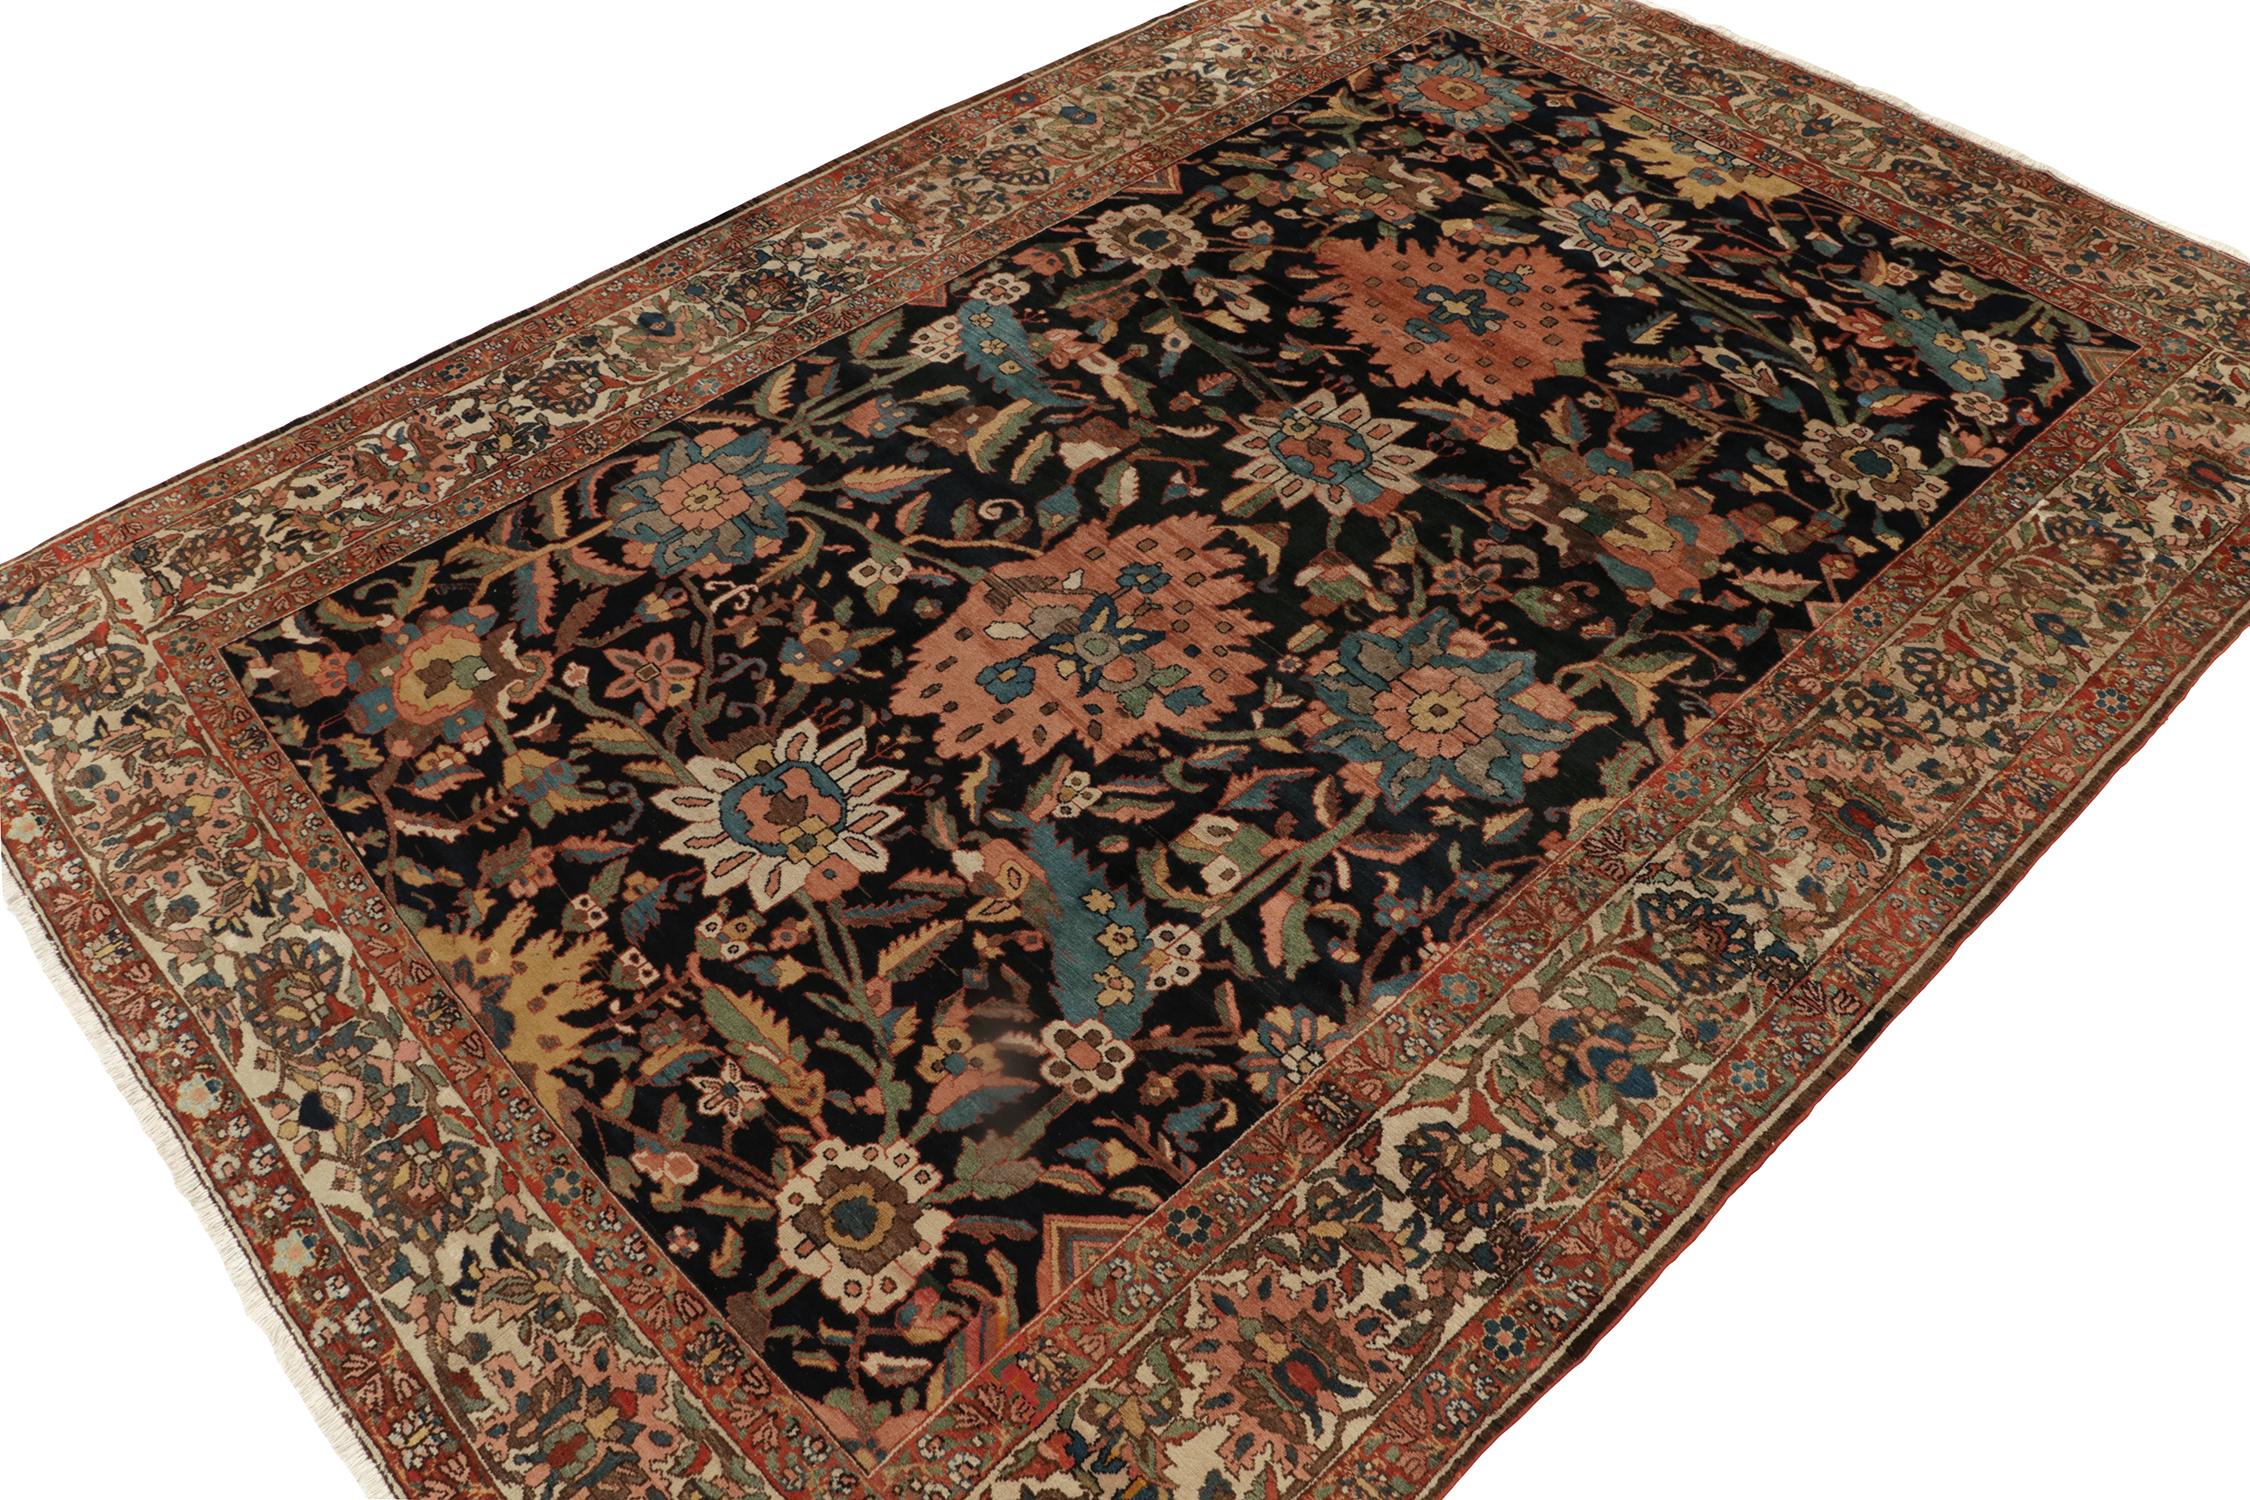 Newly unveiled from Rug & Kilim’s Antique & Vintage Collection, an extremely rare 12x16 antique Persian rug of Bakhtiari provenance. 

Hand-knotted in wool circa 1910-1920, the gorgeous floral patterns flourish in a play of red, blue with pink &